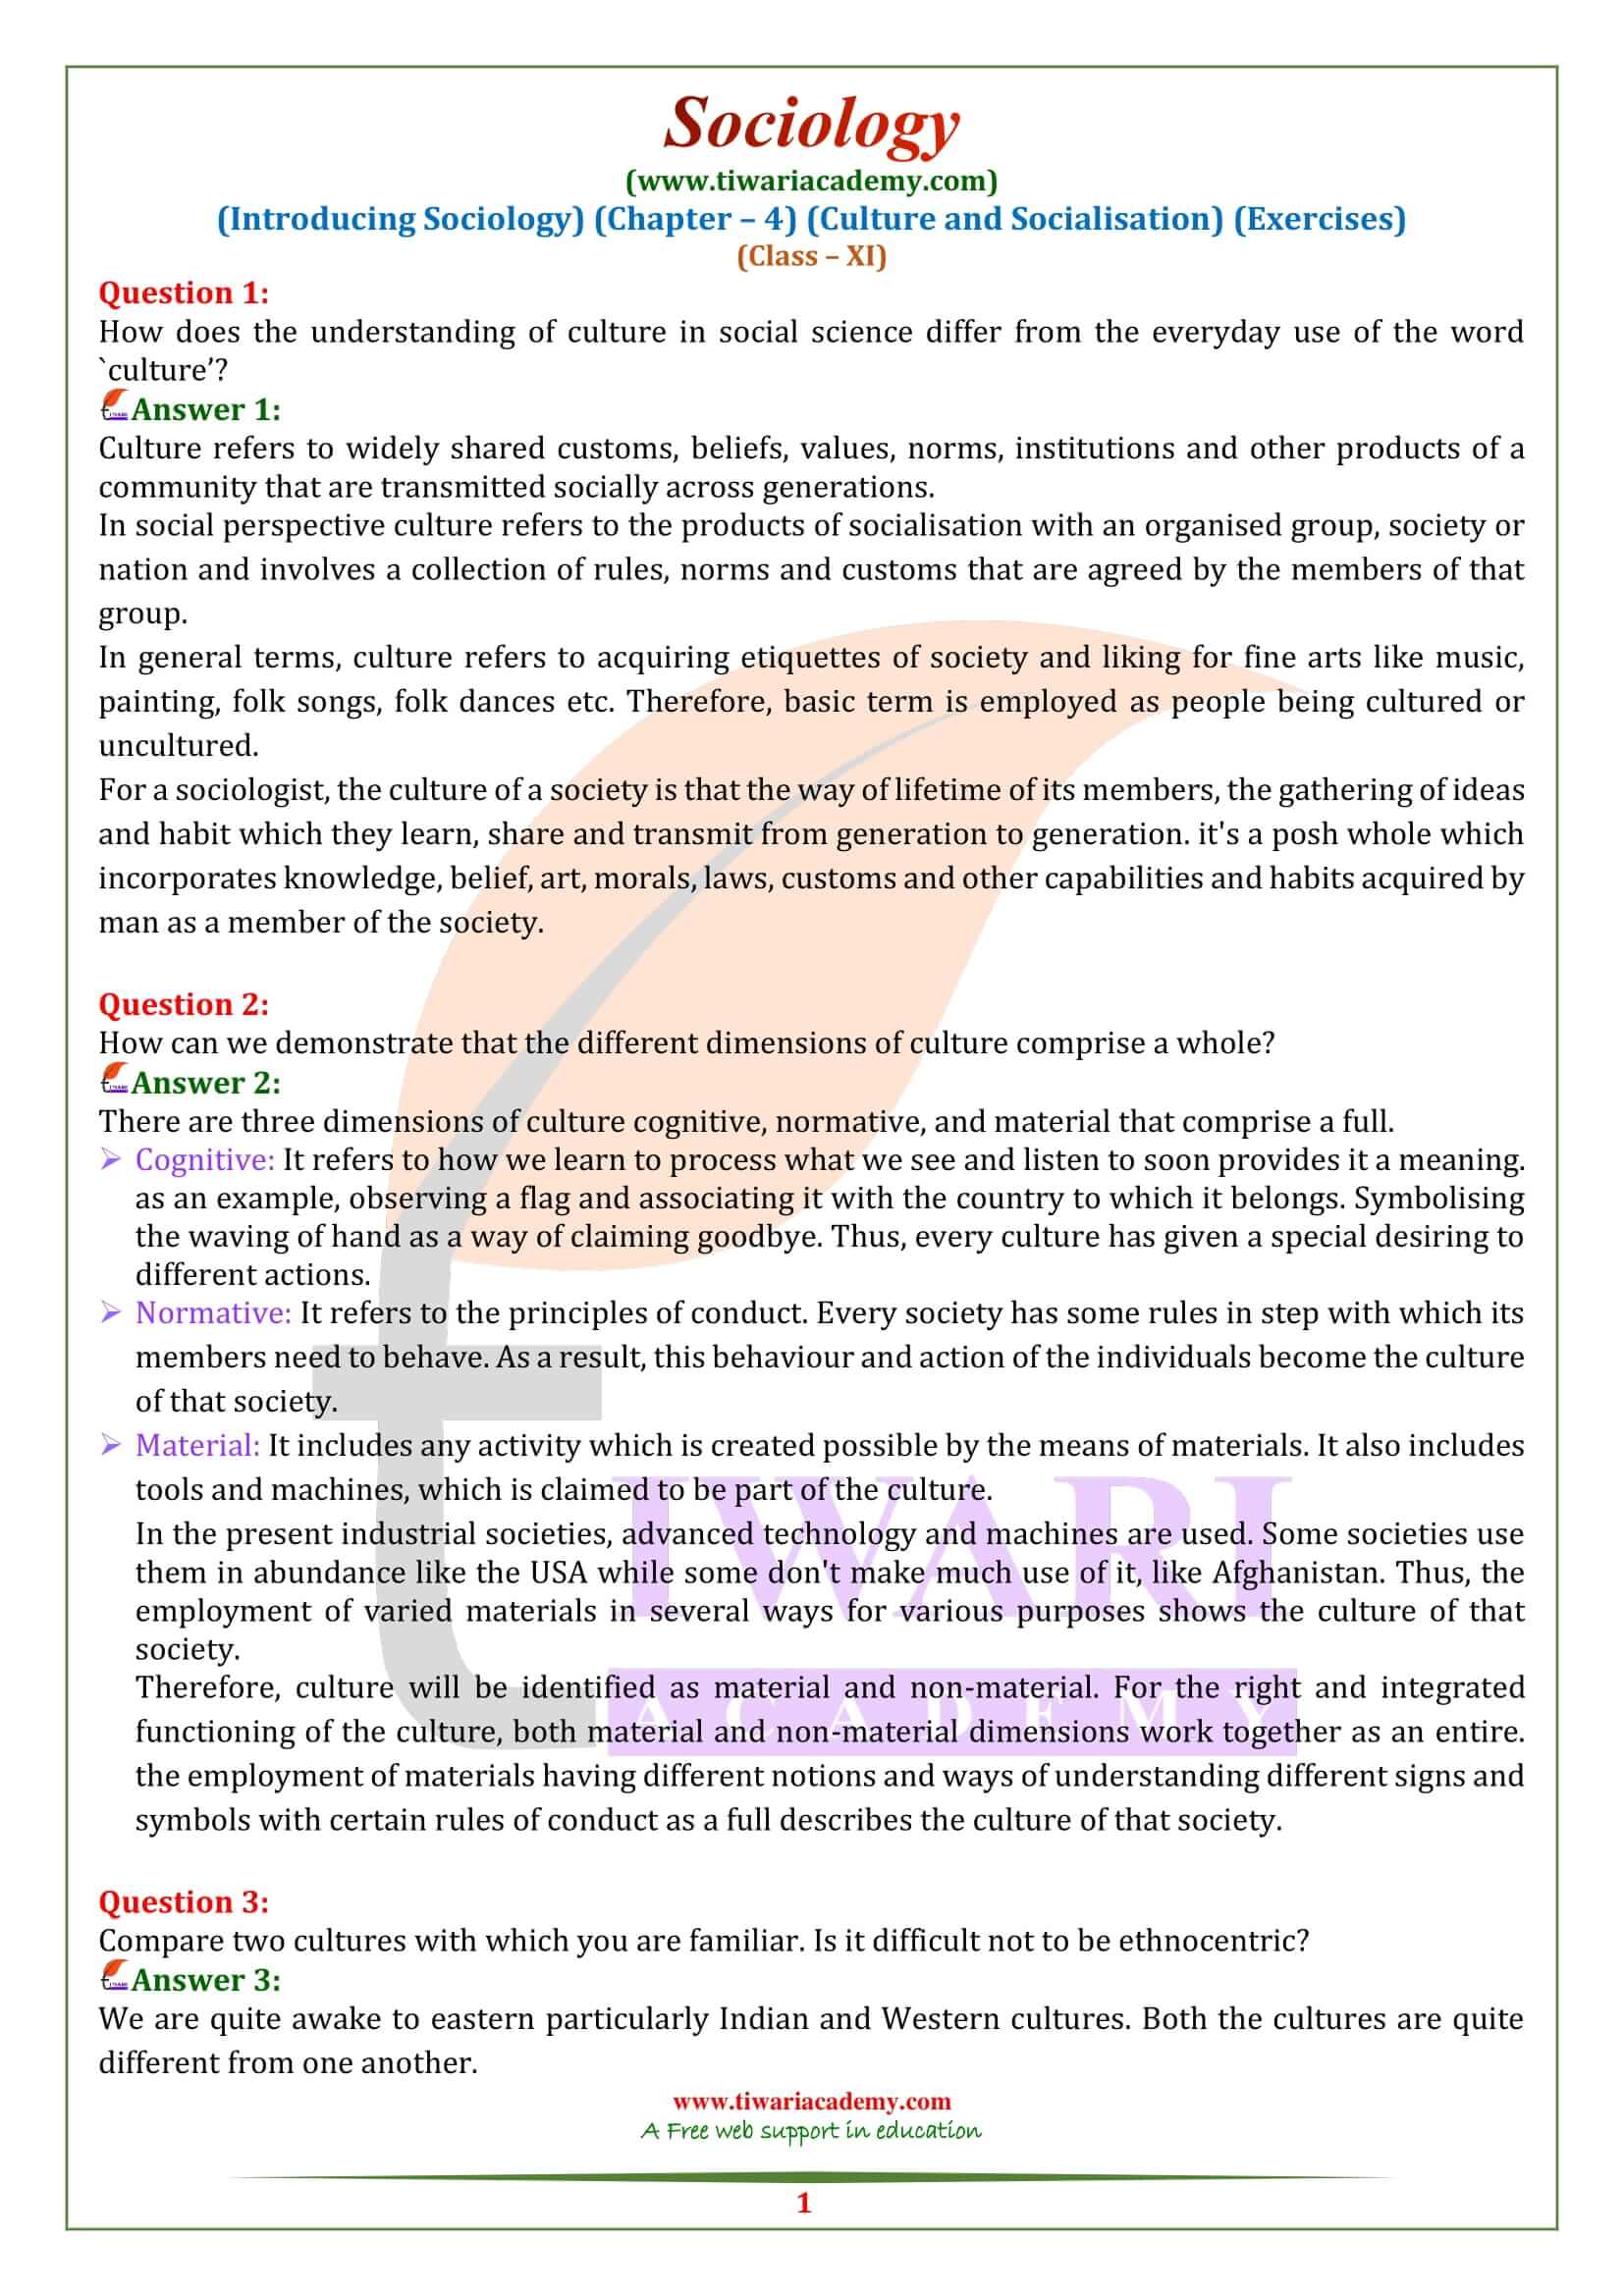 NCERT Solutions for Class 11 Sociology Chapter 4